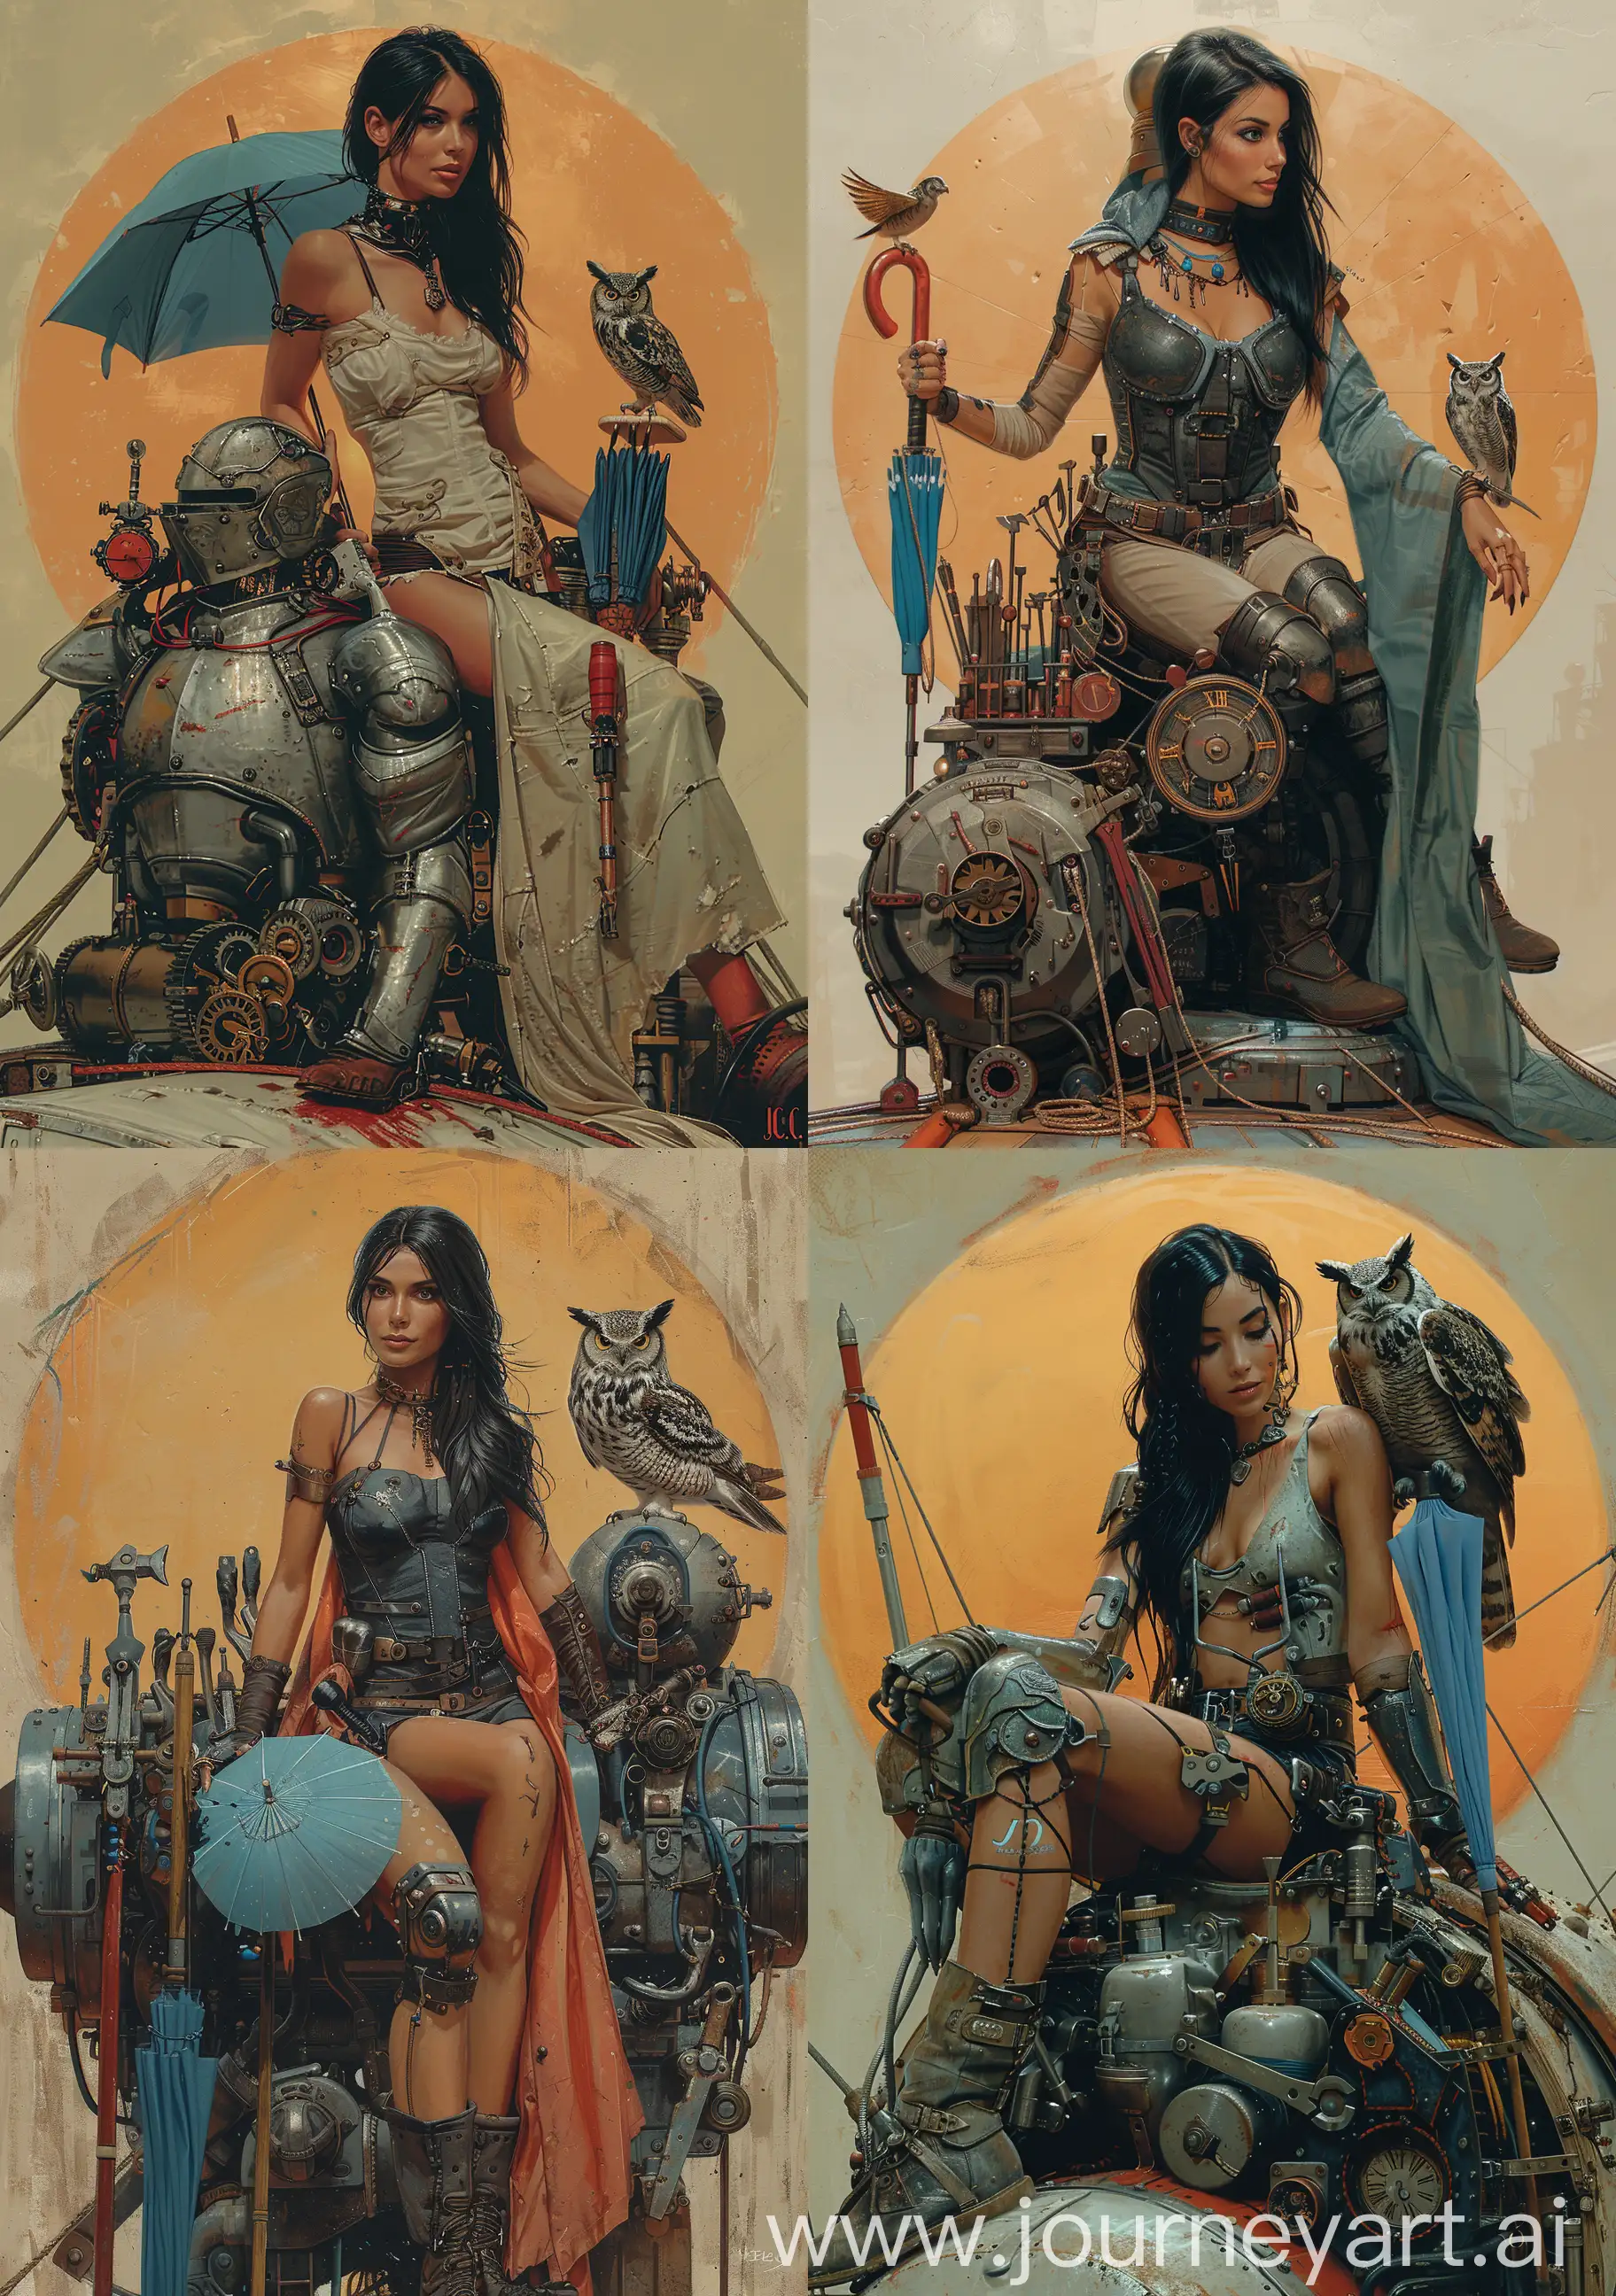 A steampunk-style woman sitting on top of an airship, holding onto the winged hand brave in armor and with a blue umbrella. She has long black hair tied back into a high ponytail. The background is a round sun. In front of her stands many different tools for repairing things. There's an owl perched next to it. A large clockwork engine sits at their feet. In the style of J.C. Leyendecker. --ar 45:64 --stylize 750